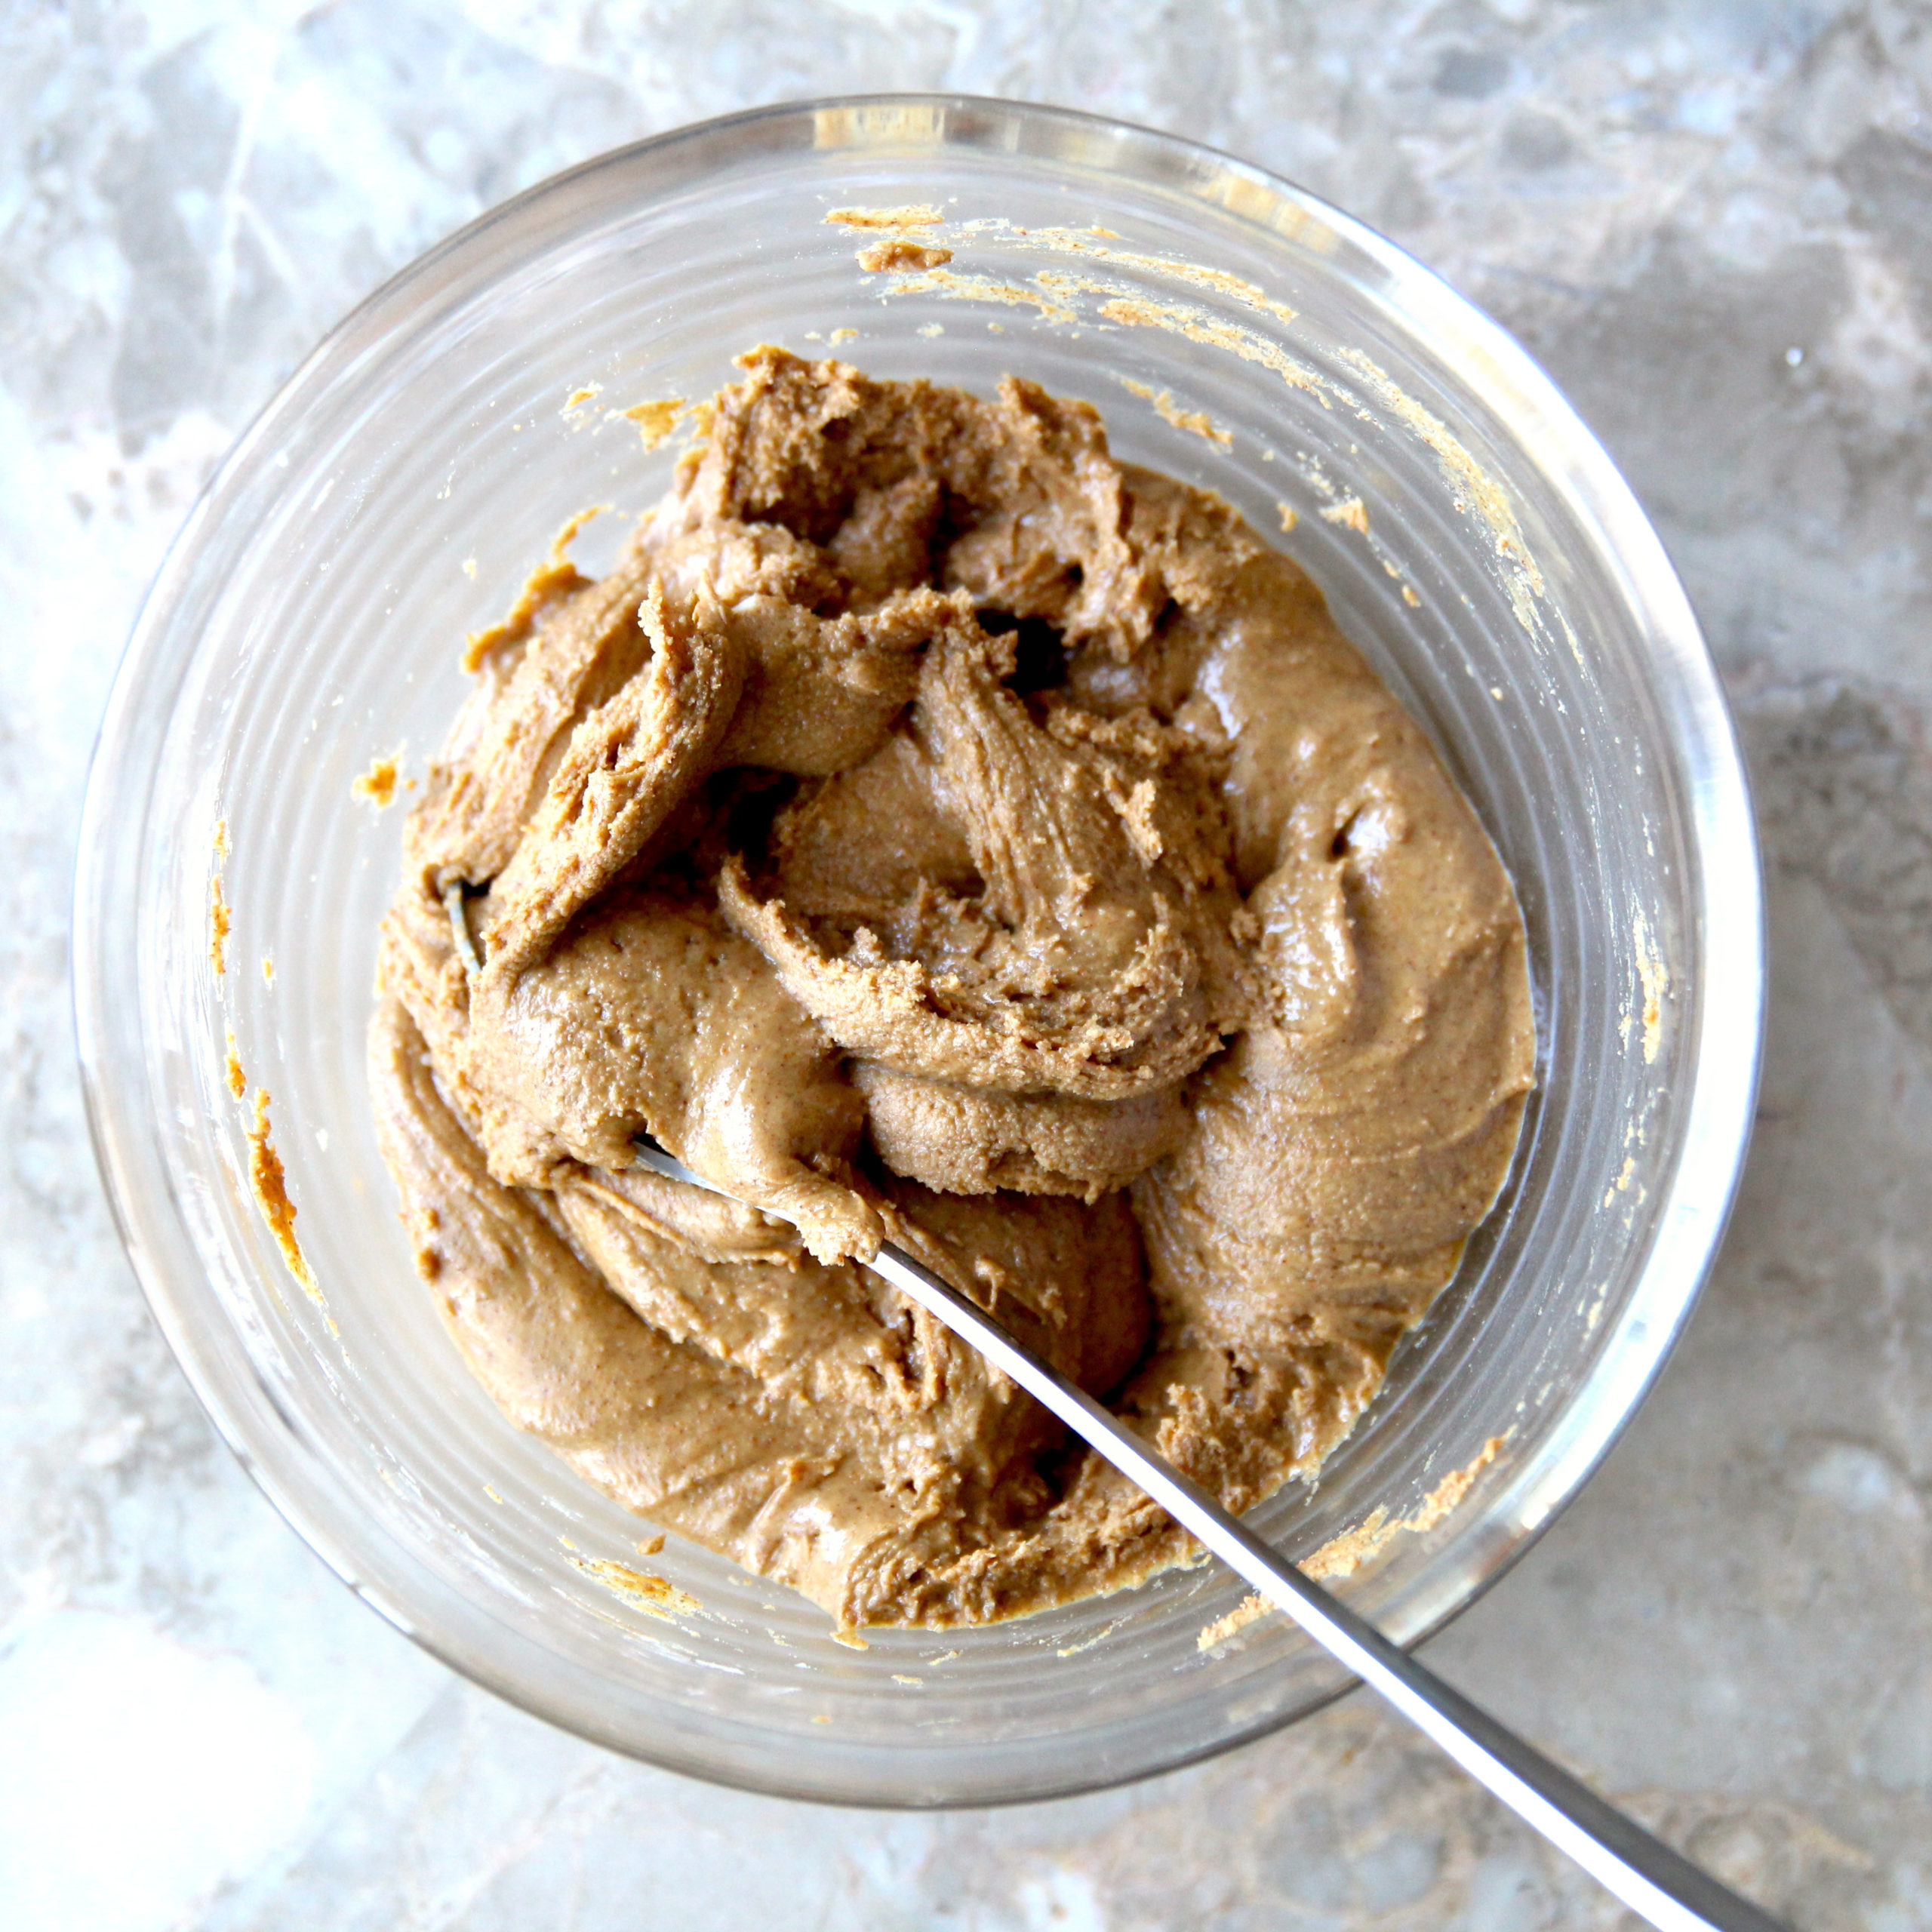 2-Ingredient Almond Butter Frosting (Easy and Healthy) - Caramel Apple Dip